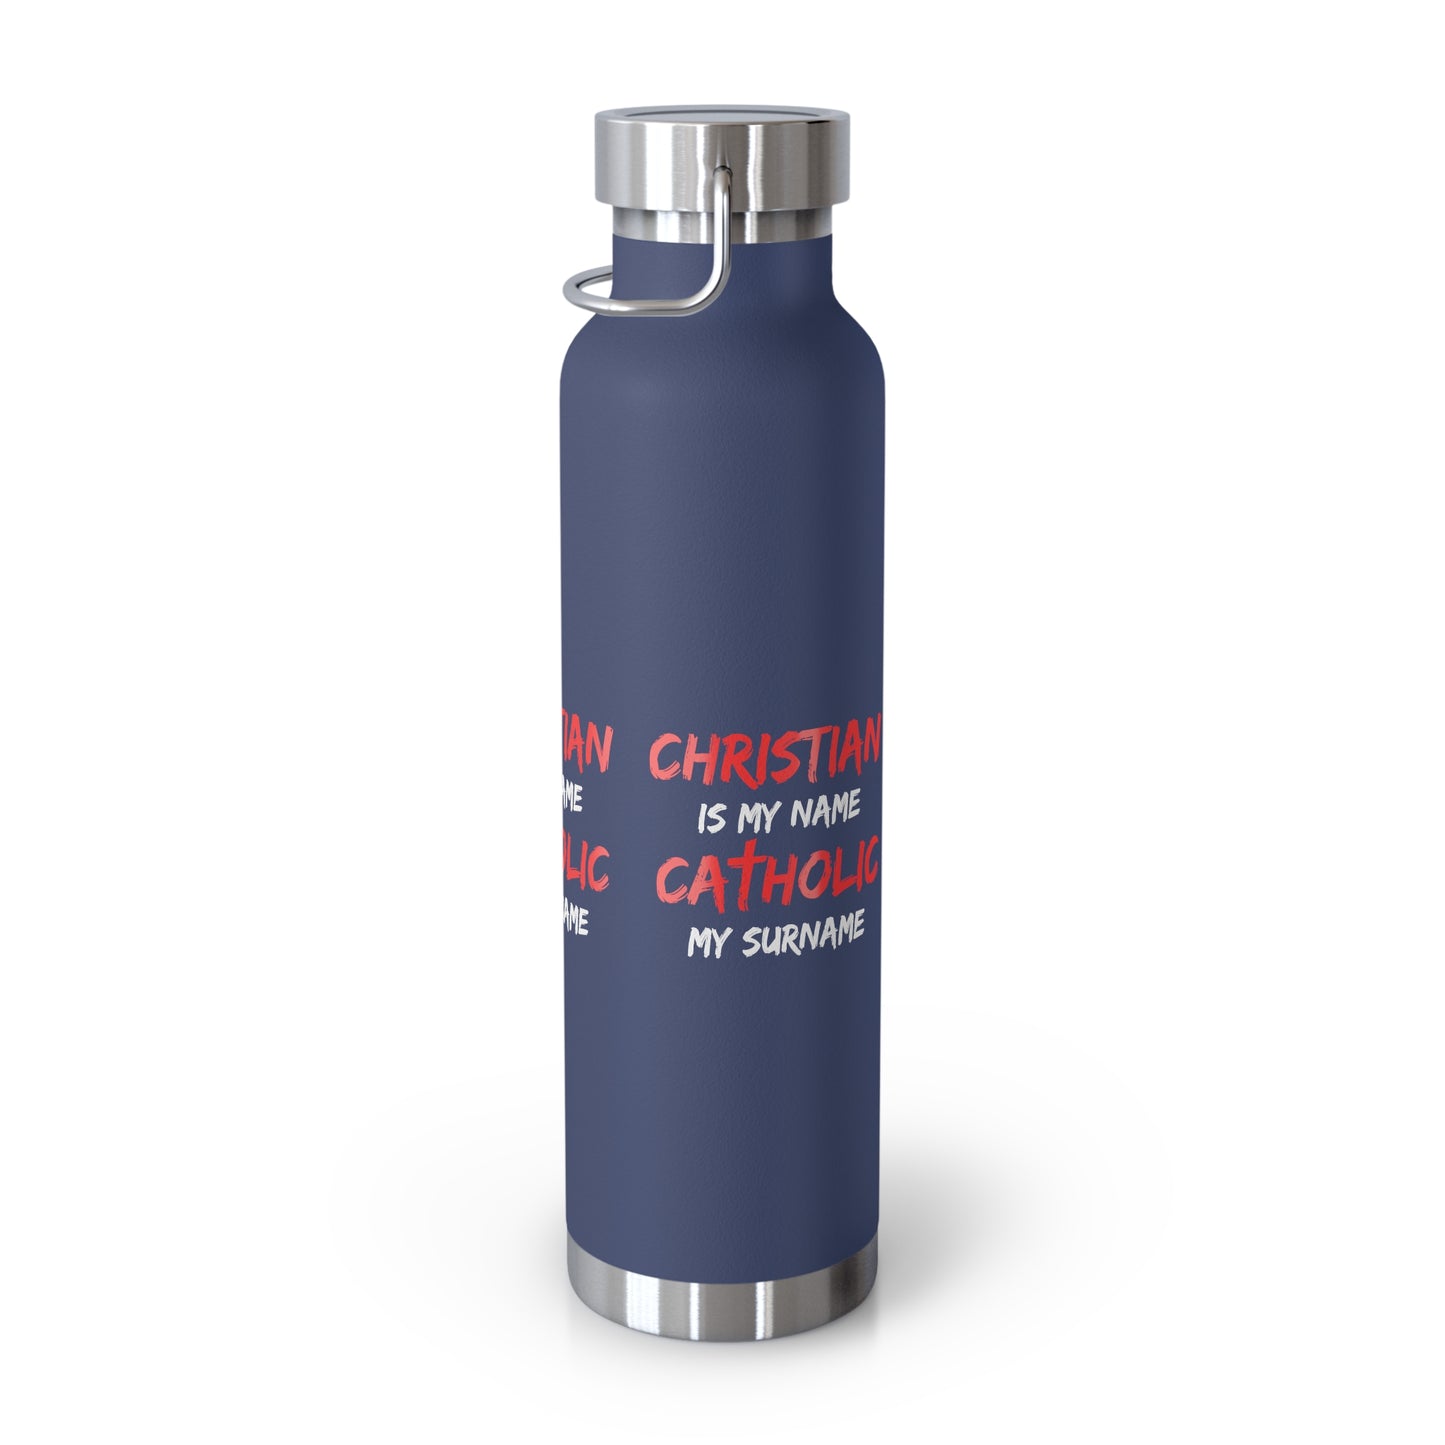 Christian is my Name, Catholic my Surname Copper Vacuum Insulated Bottle, 22oz